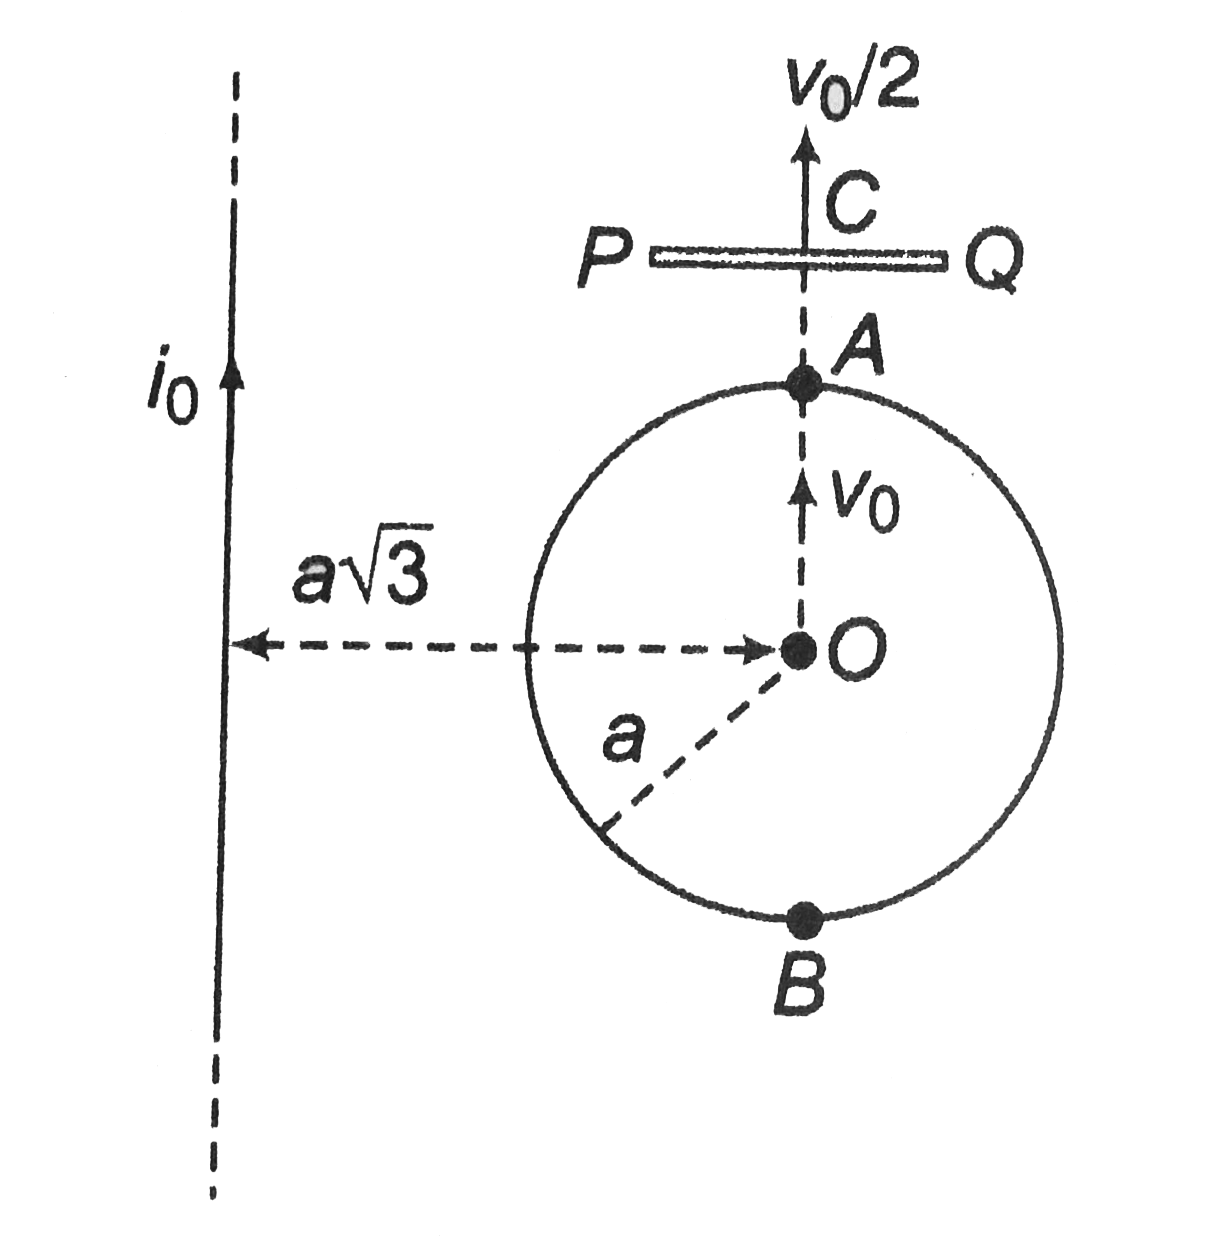 A conducting circular loop of radius a and resistance per unit length R is moving with a constant velocity v0 , parallel to an infinite conducting wire carrying current i0. A conducting rod of length 2a is approaching the centre of the loop with a constant velocity v0/2 along the direction 2 of the current. At the instant t = 0, the rod comes in contact with the loop at A and starts sliding on the loop with the constant velocity. Neglecting the resistance of the rod and the self-inductance of the circuit, find the following when the rod slides on the loop.      (a) The current through the rod when it is at a distance of (a/2) from the point A of the loop.   (b) Force required to maintain the velocity of the rod at that instant.